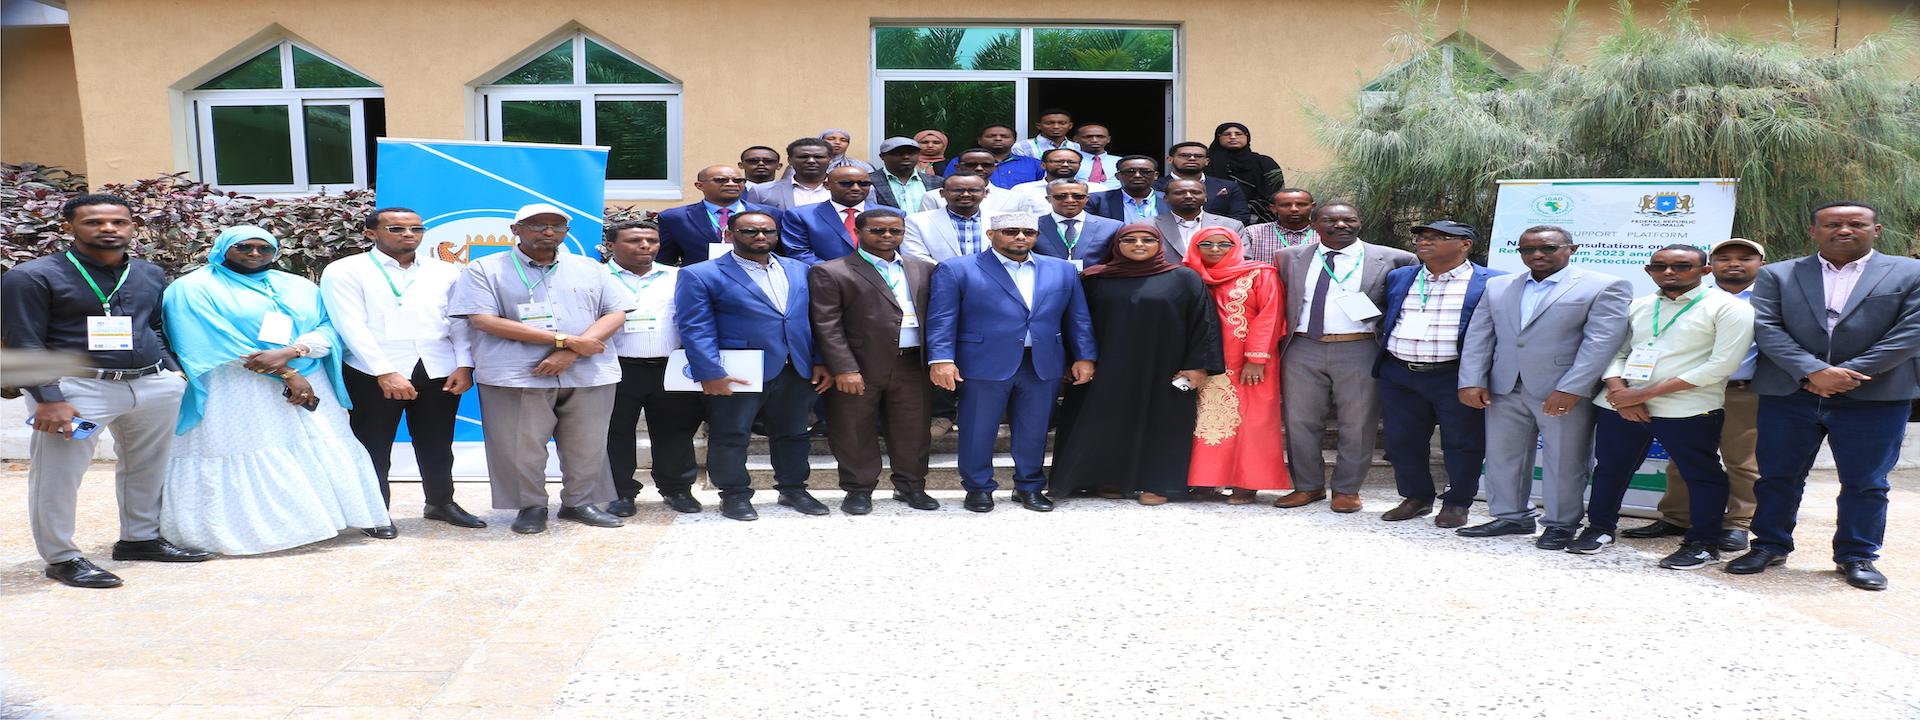 Somalia Reviews 2019 GRF Pledges and Validates Protection Policy